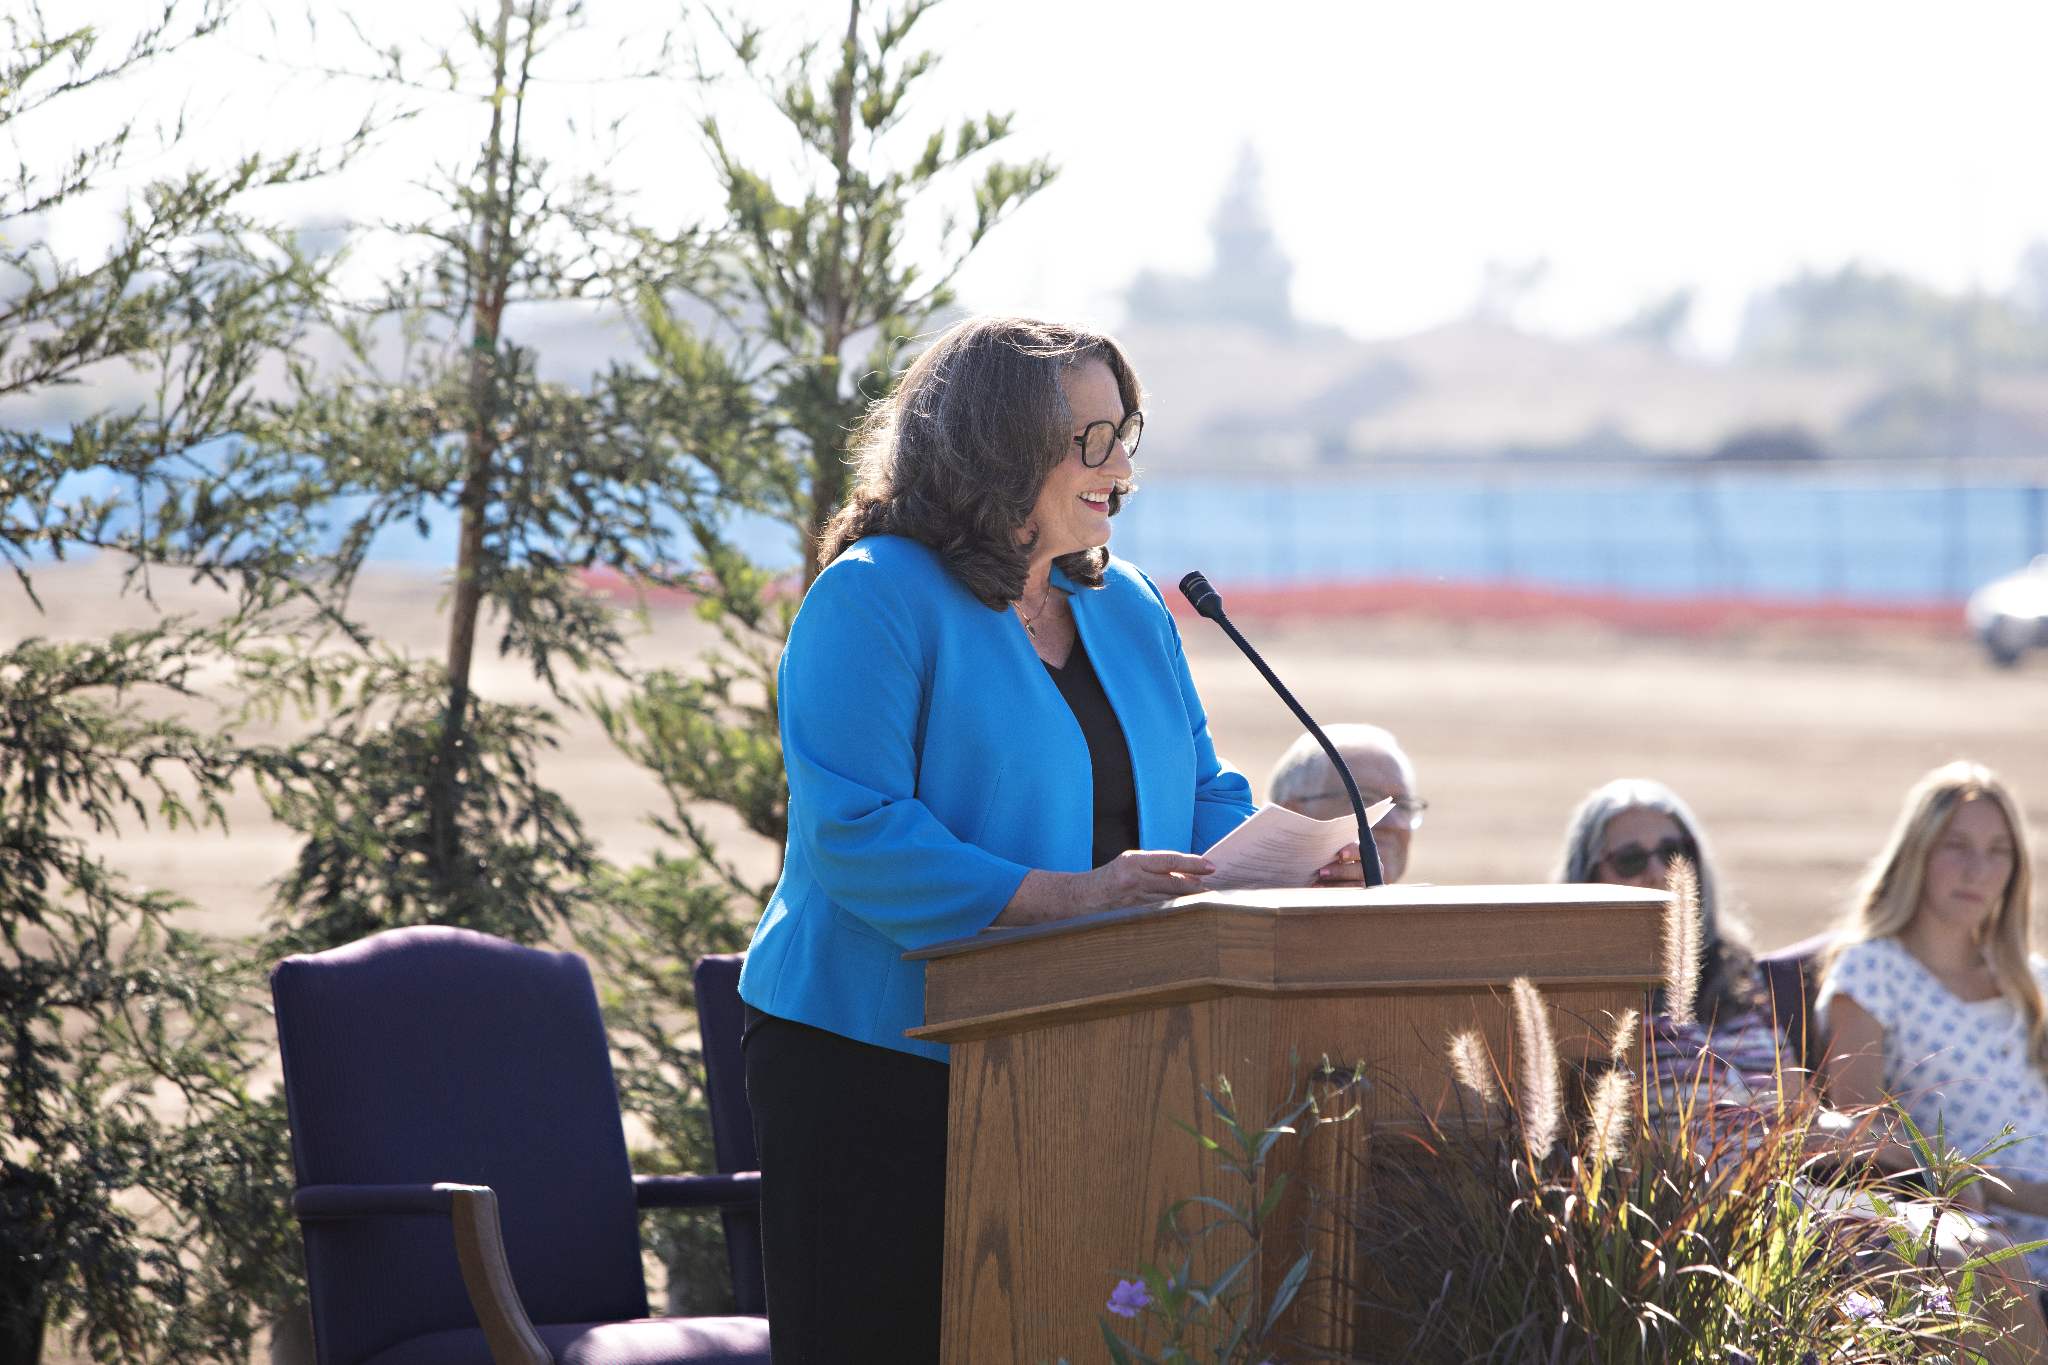 Modesto city Mayor Sue Zwahlen wearing a blue blazer and speaking at a pulpit outside.